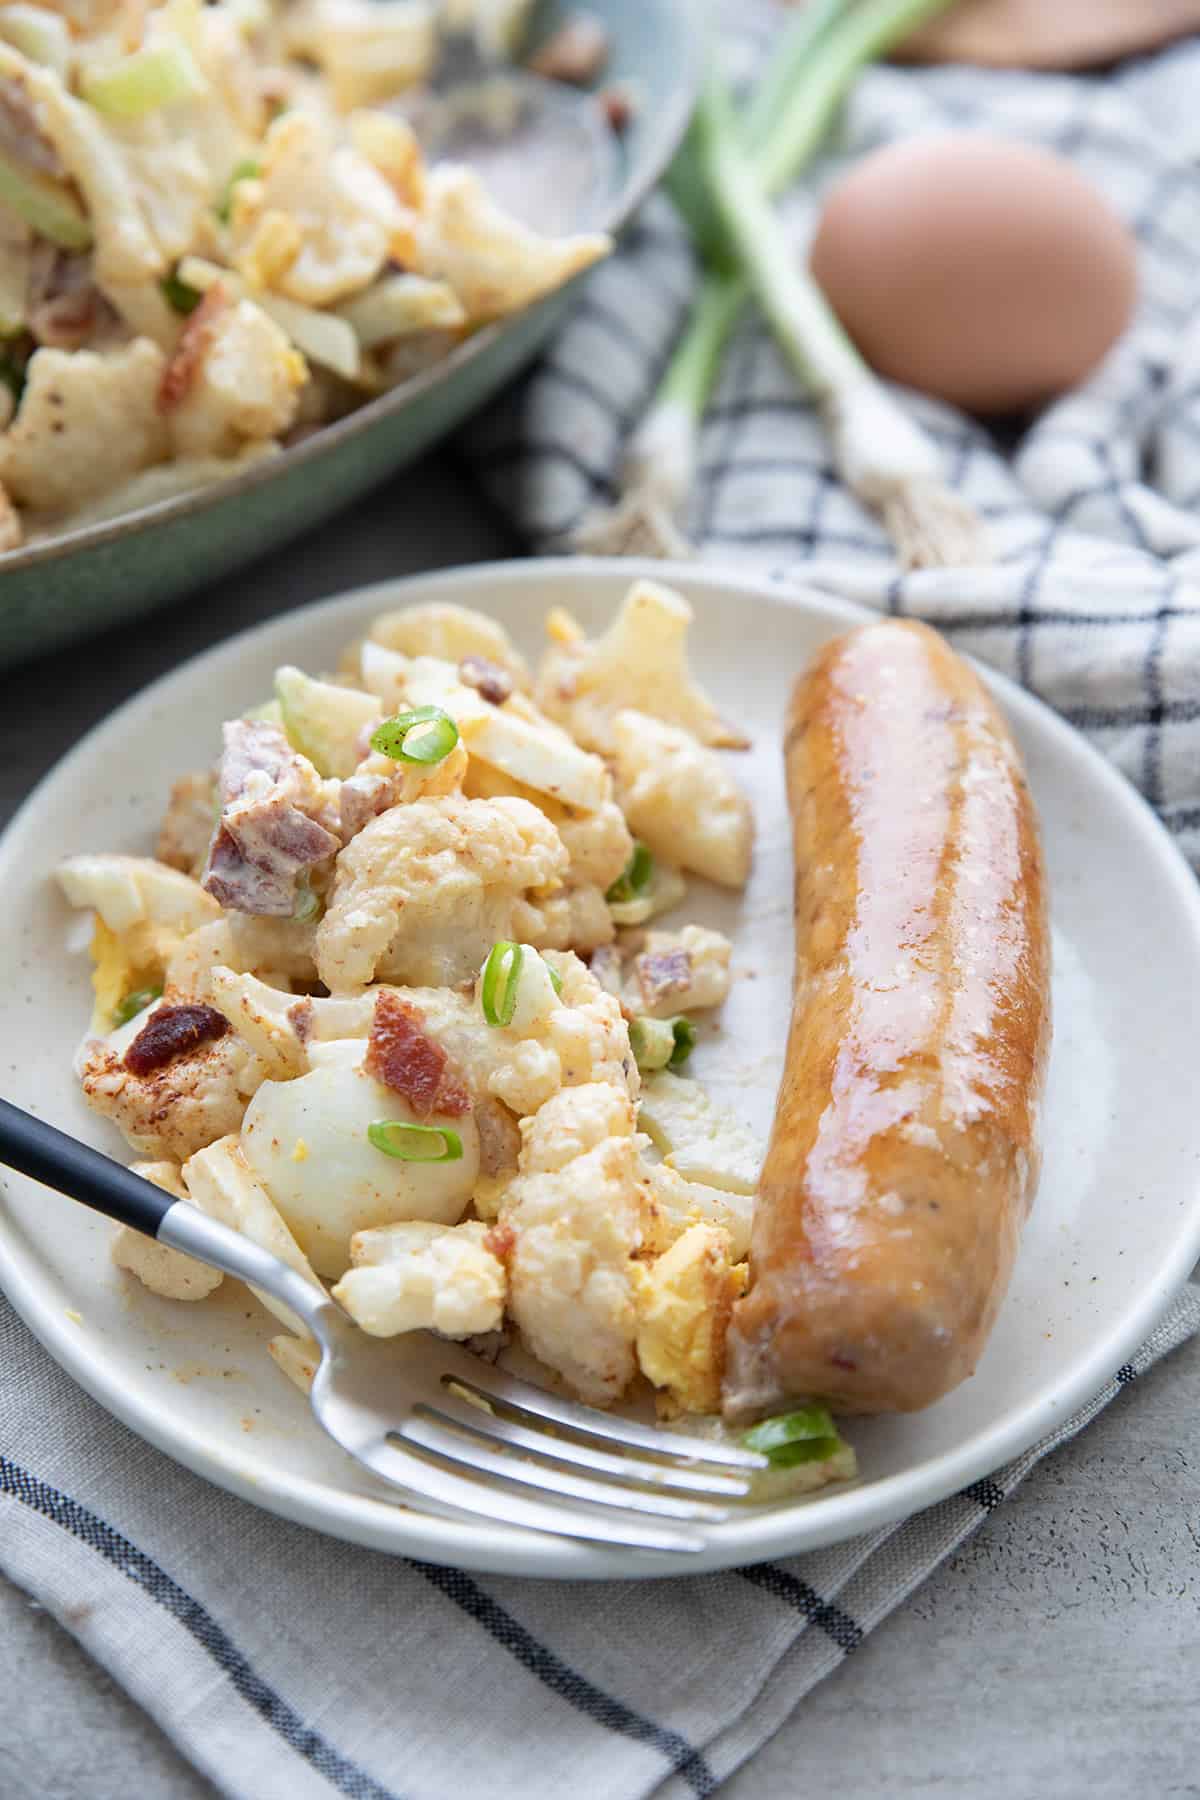 Cauliflower potato salad and a grilled sausage on a plate with a fork.